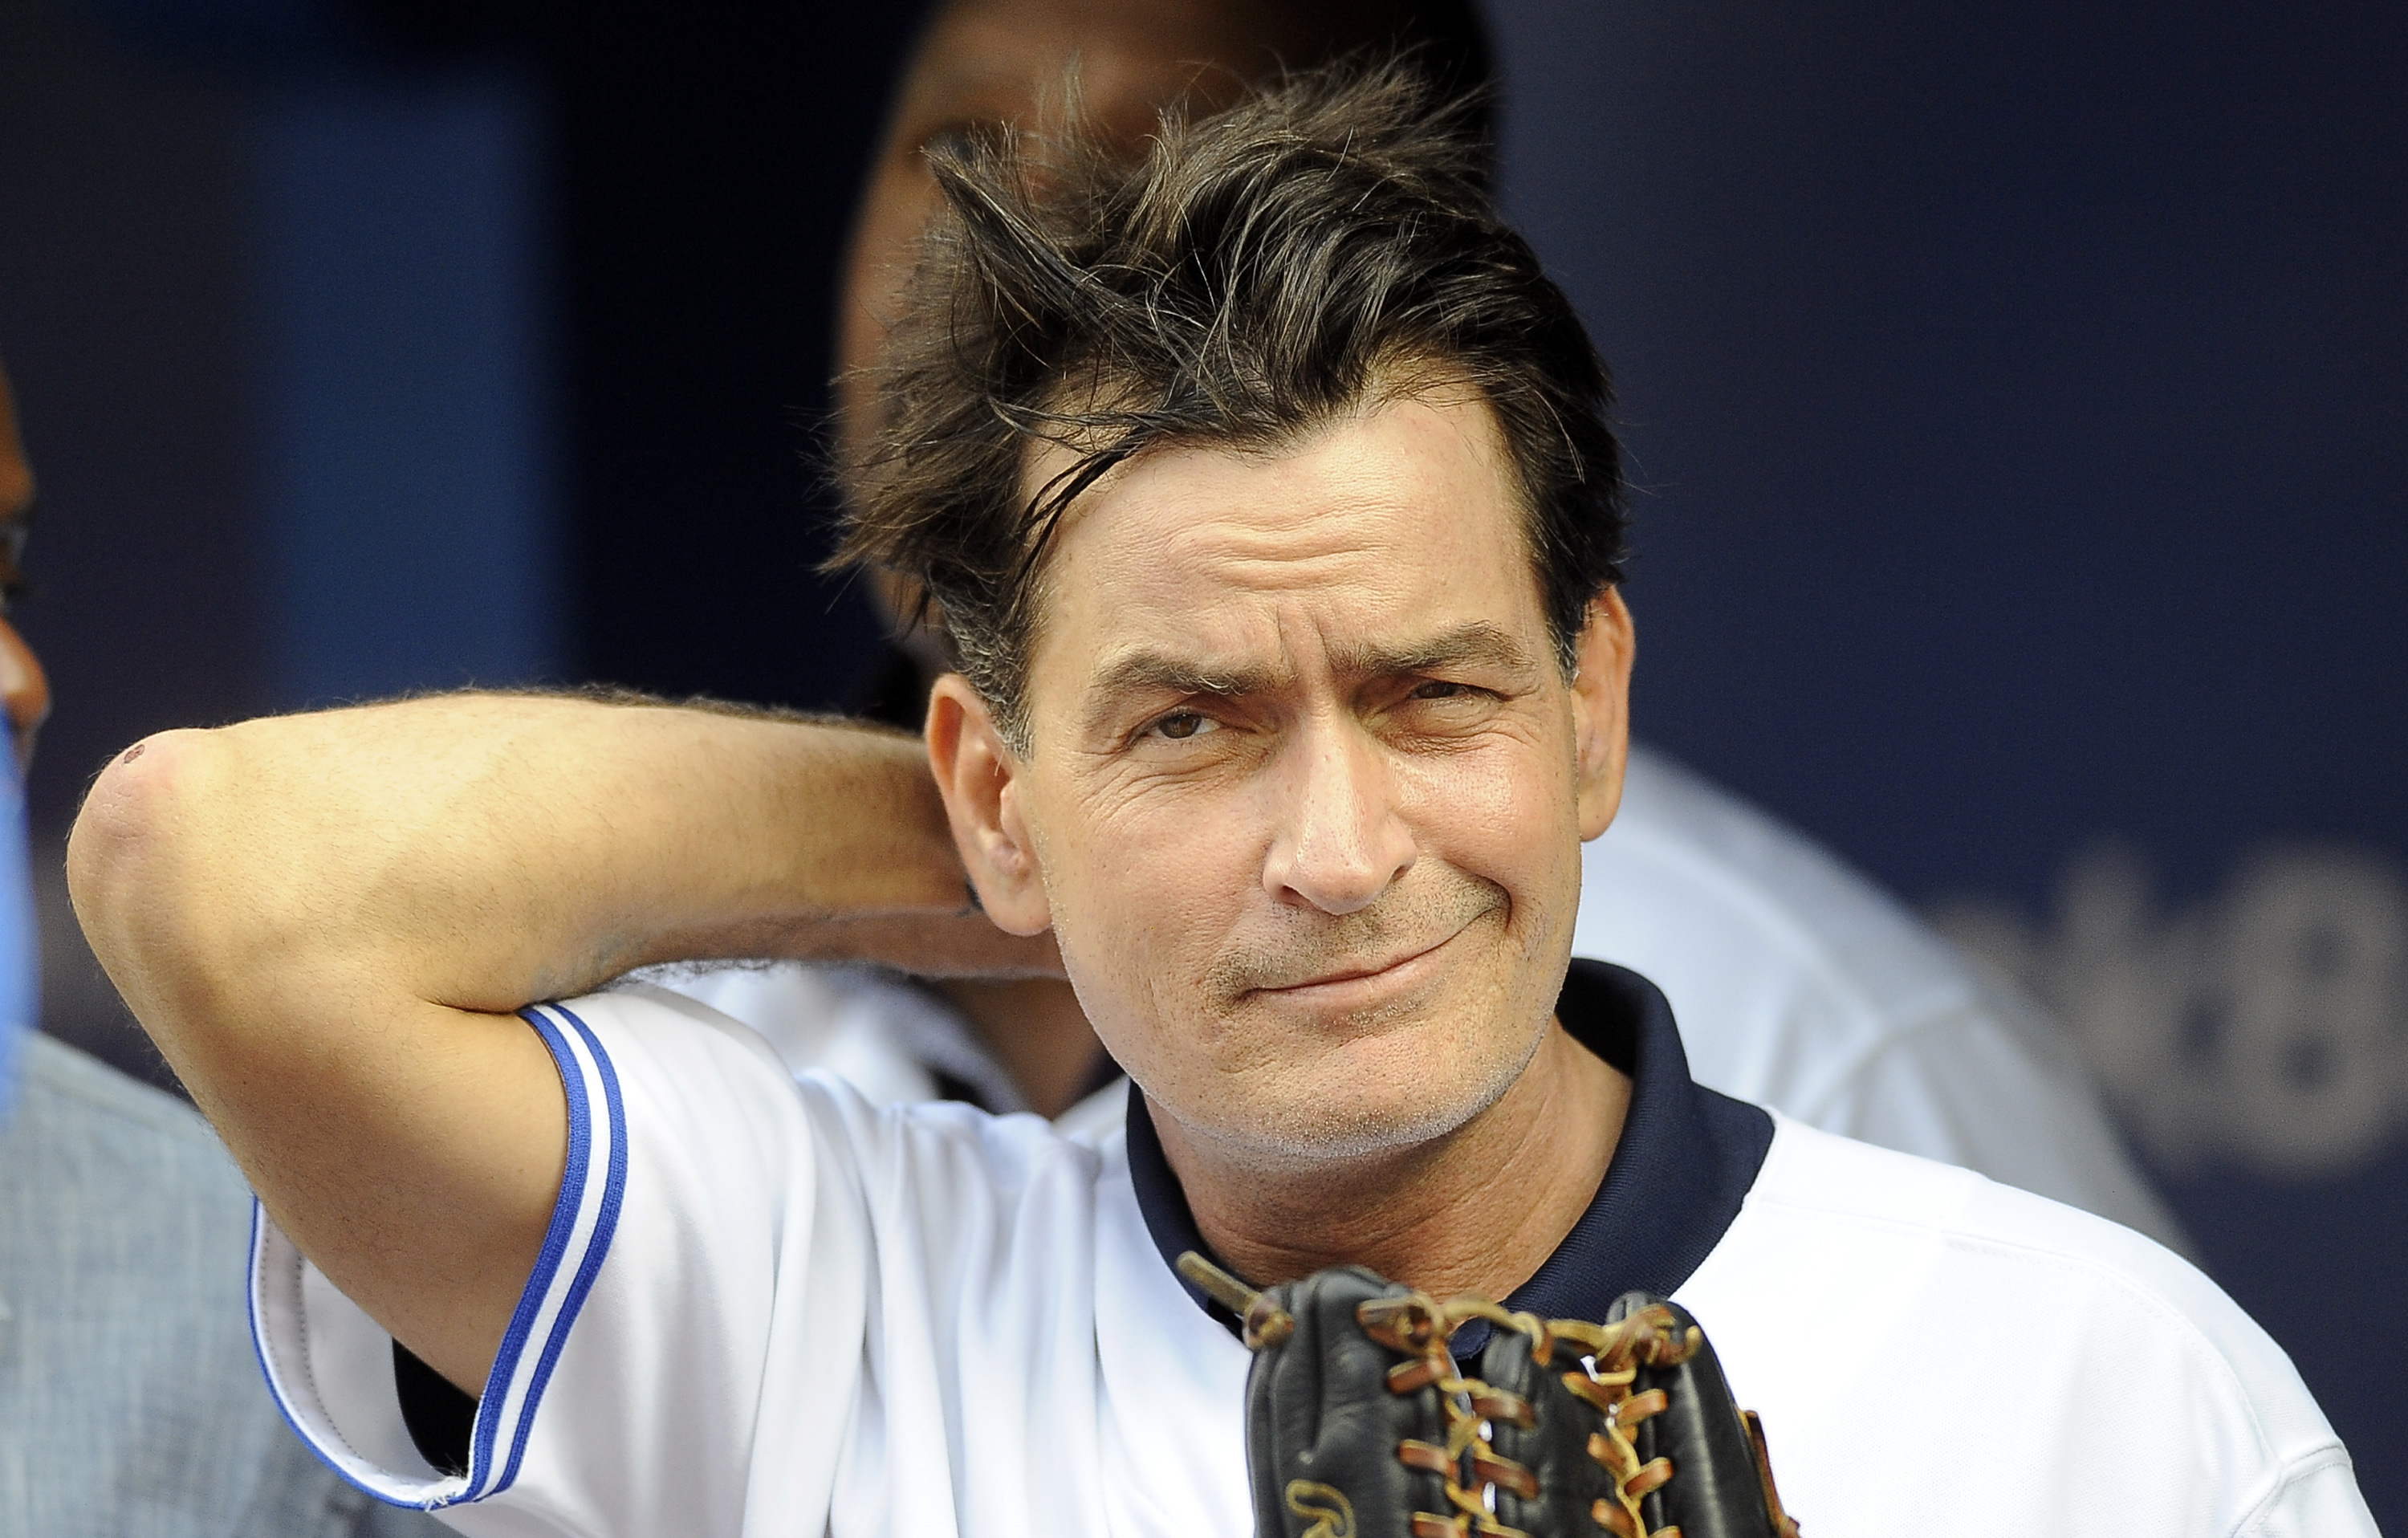 Charlie Sheen - Celebrities with HIV/AIDS - Pictures - CBS News